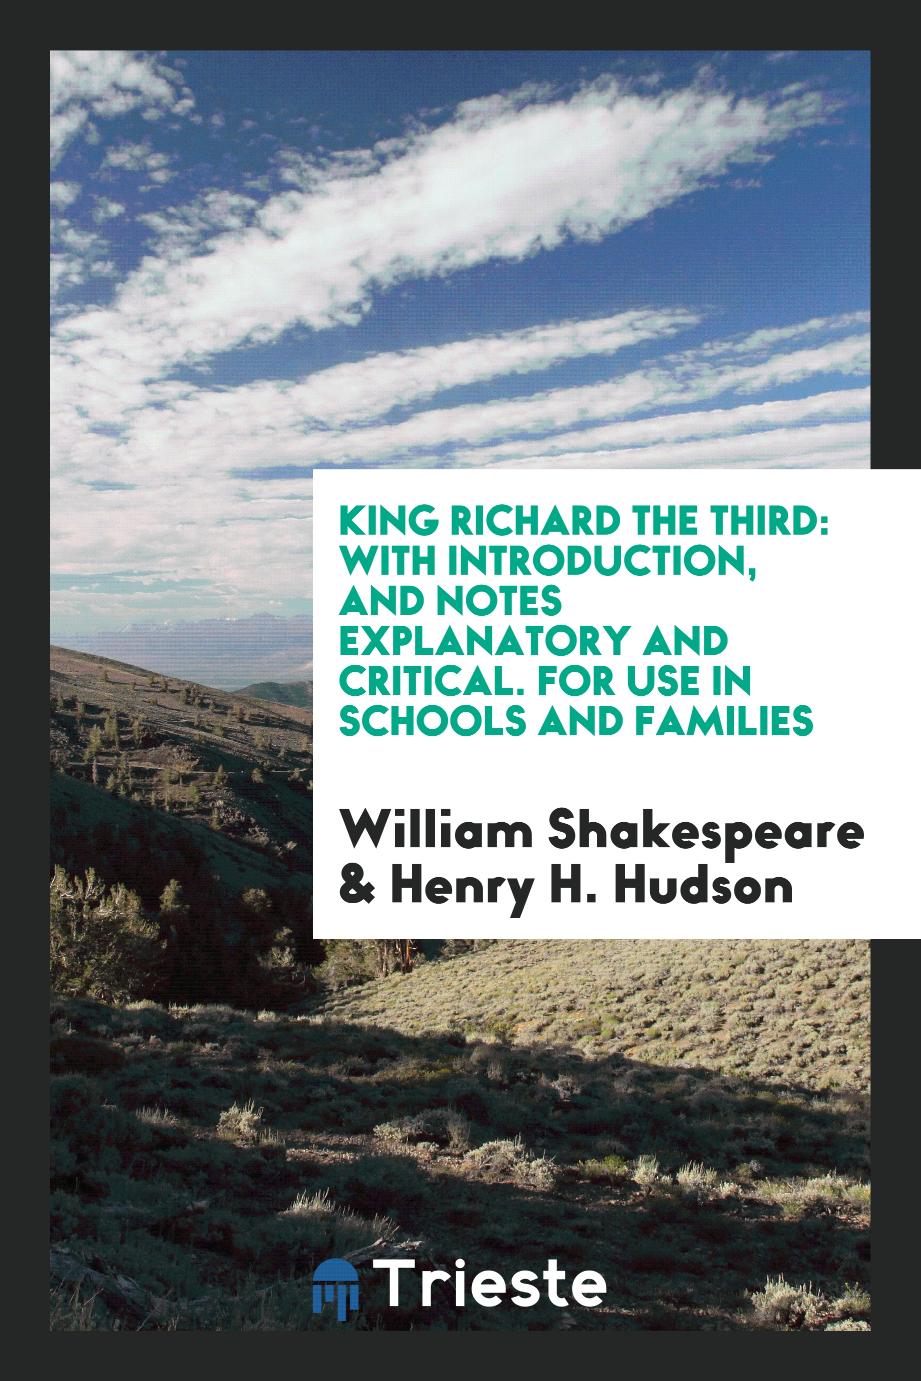 King Richard the Third: With Introduction, and Notes Explanatory and Critical. For Use in Schools and Families